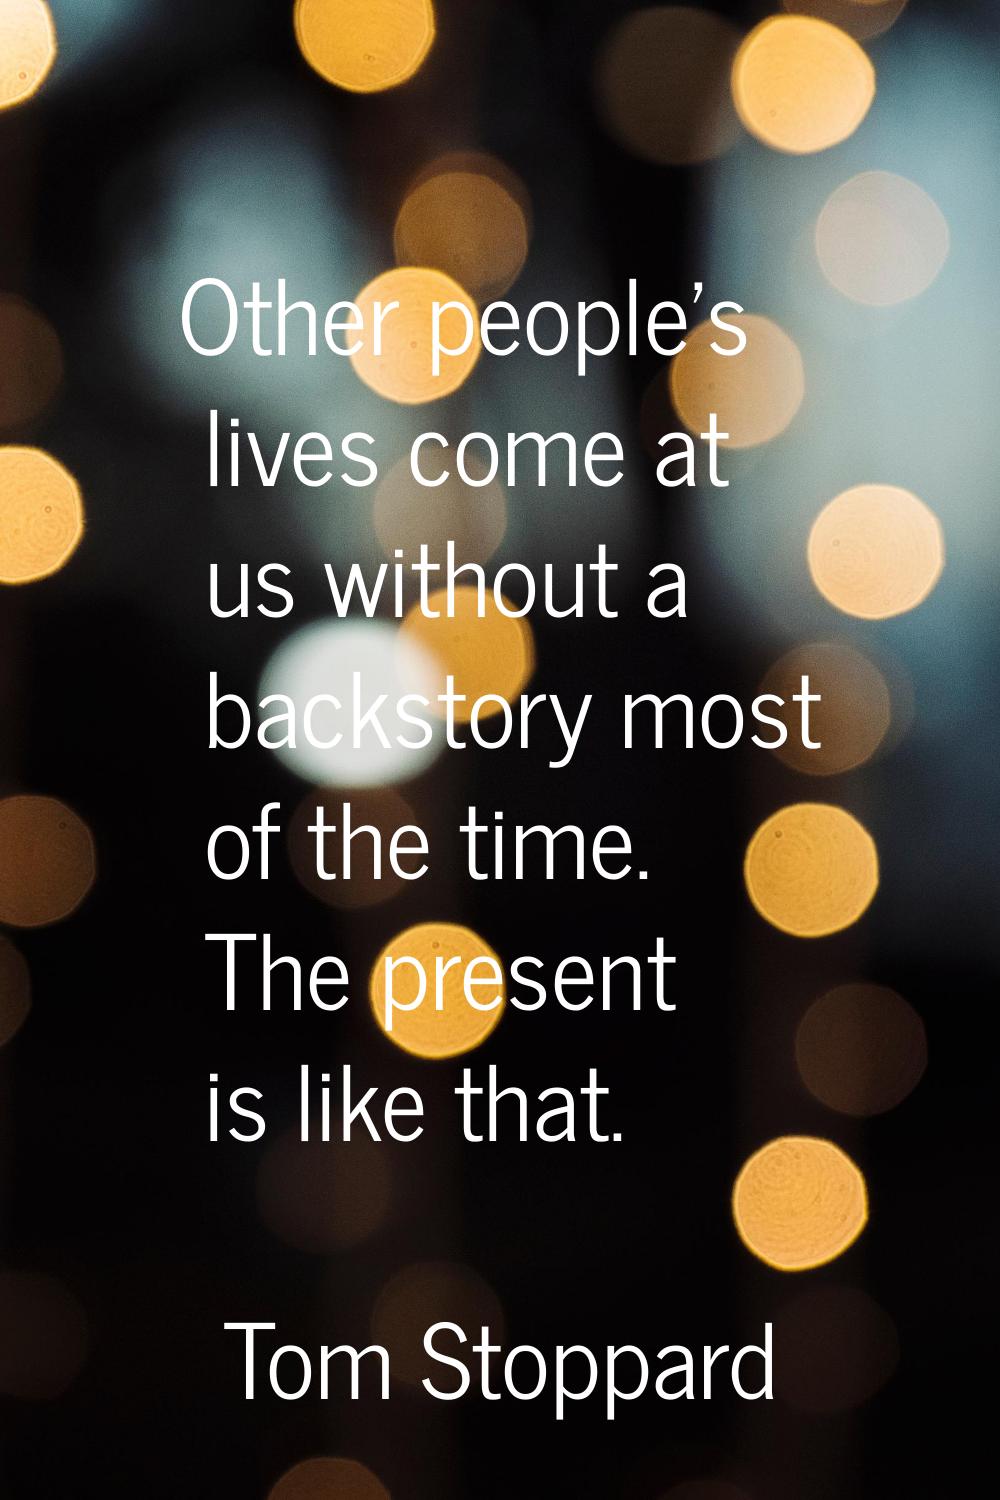 Other people's lives come at us without a backstory most of the time. The present is like that.